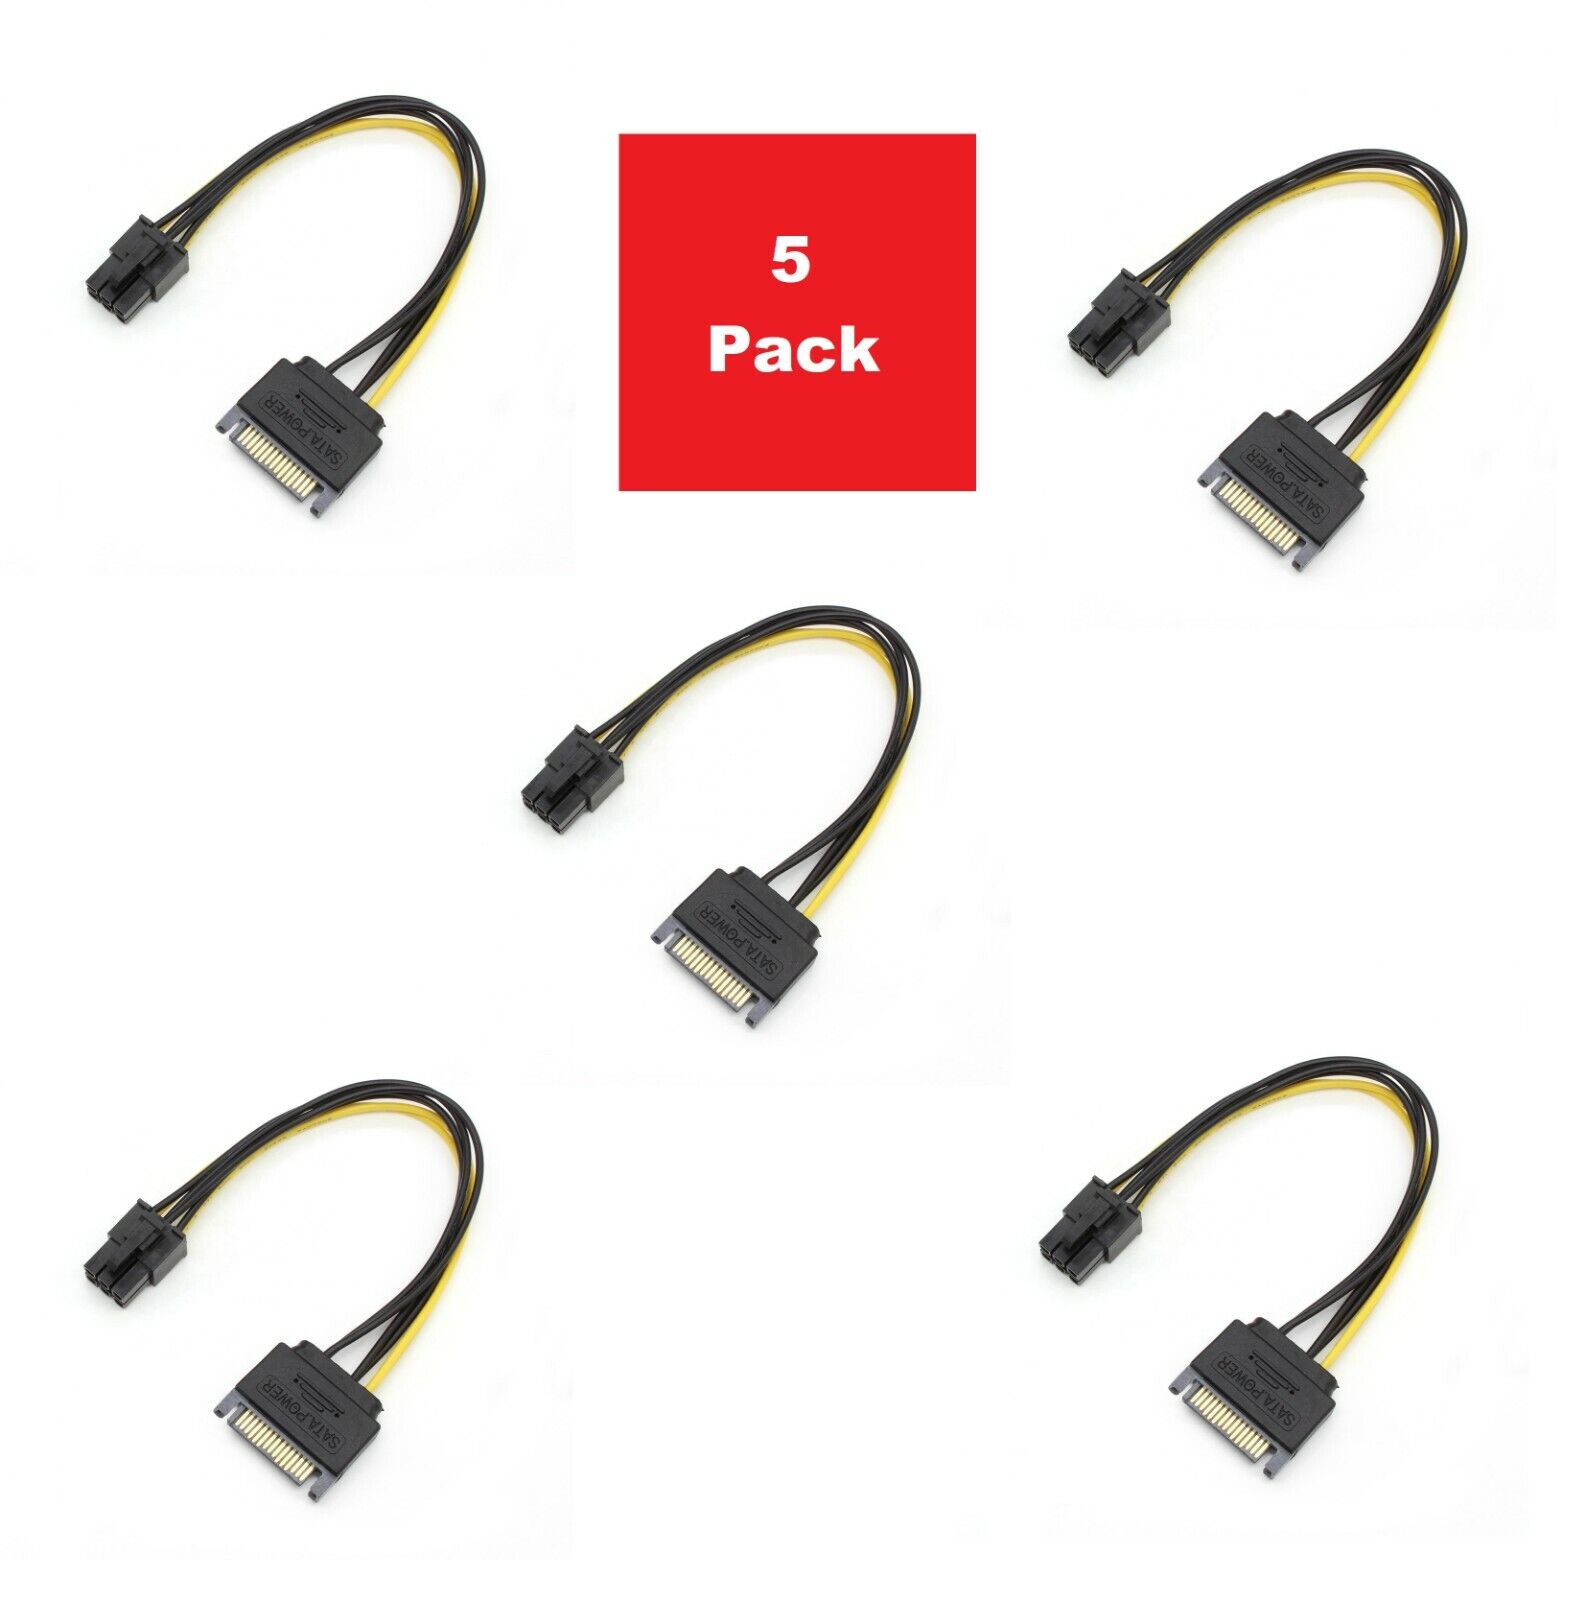 5 Pack - 15pin SATA Power to 6pin PCIe PCI-e PCI Express Adapter Cable for GPU